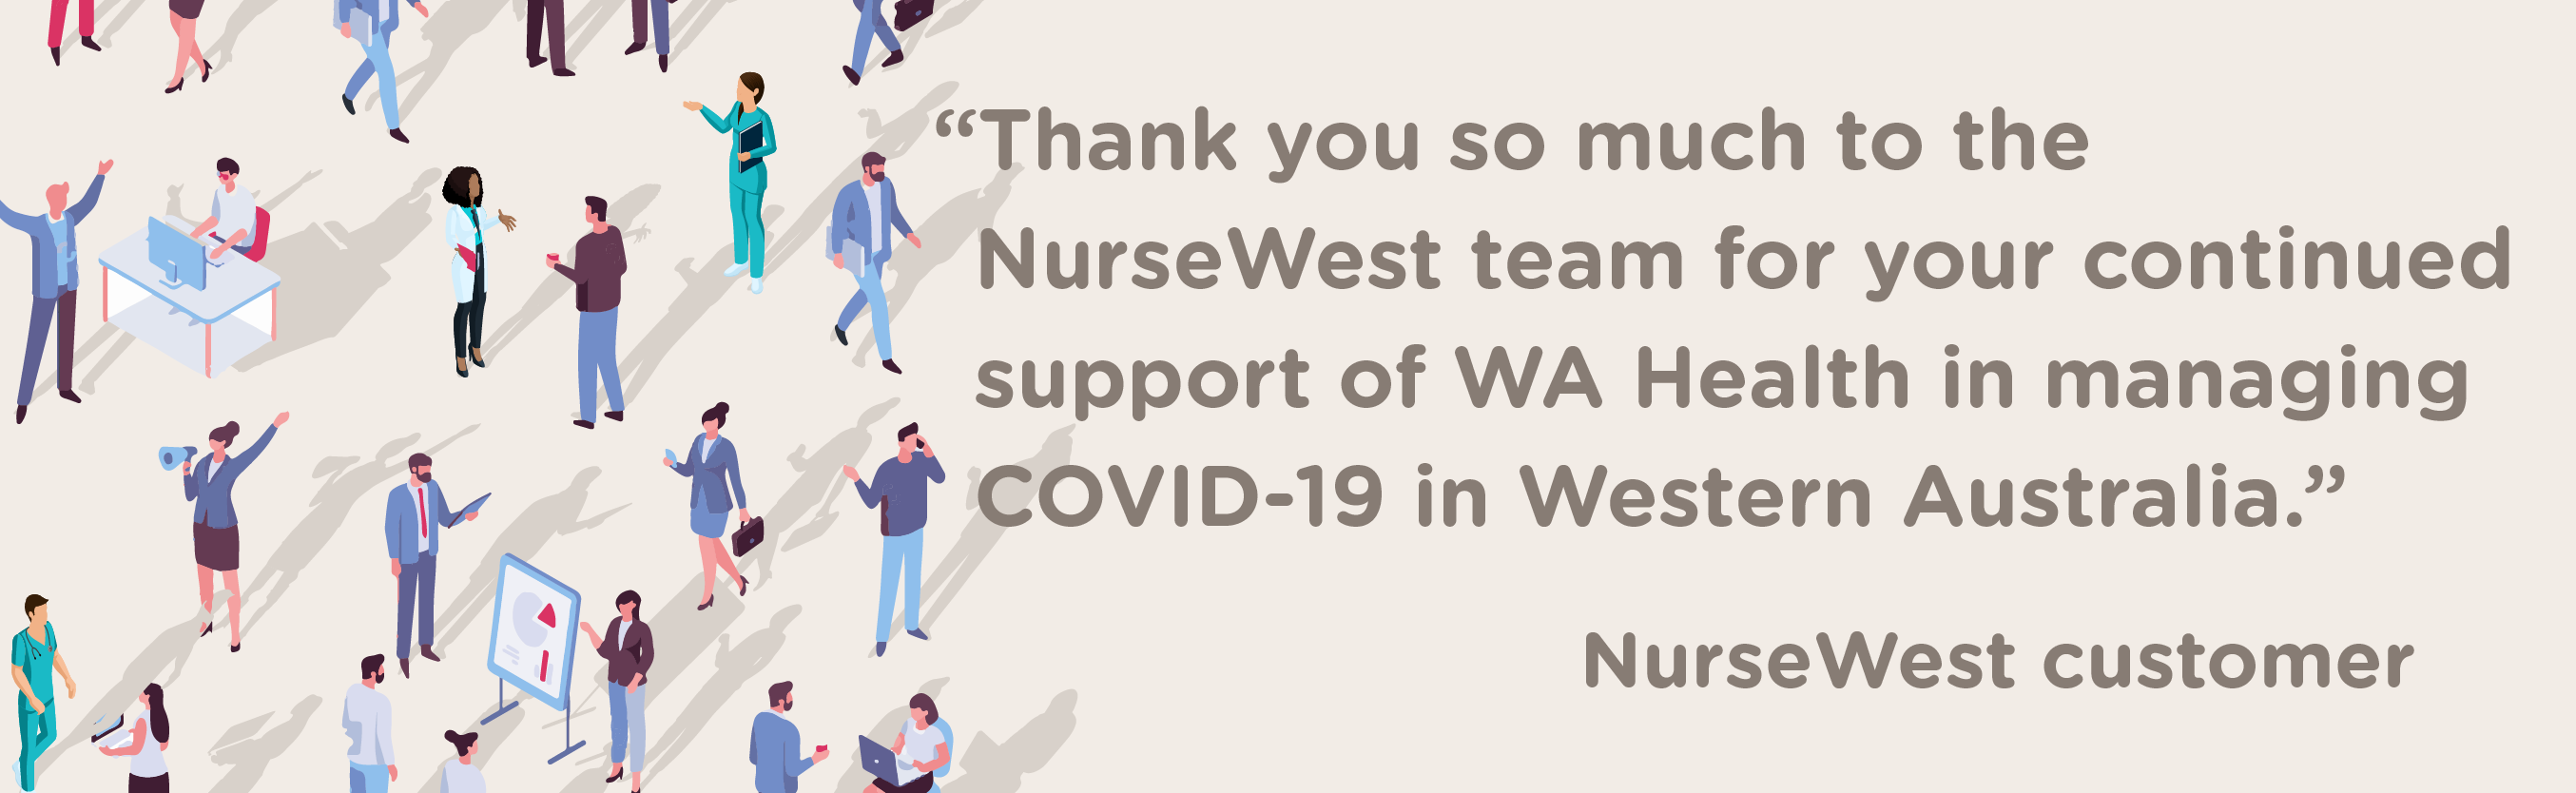 NurseWest customer quote reading "Thank you so much to the NurseWest team for your continued support of WA Health in managing COVID-19 in Western Australia."